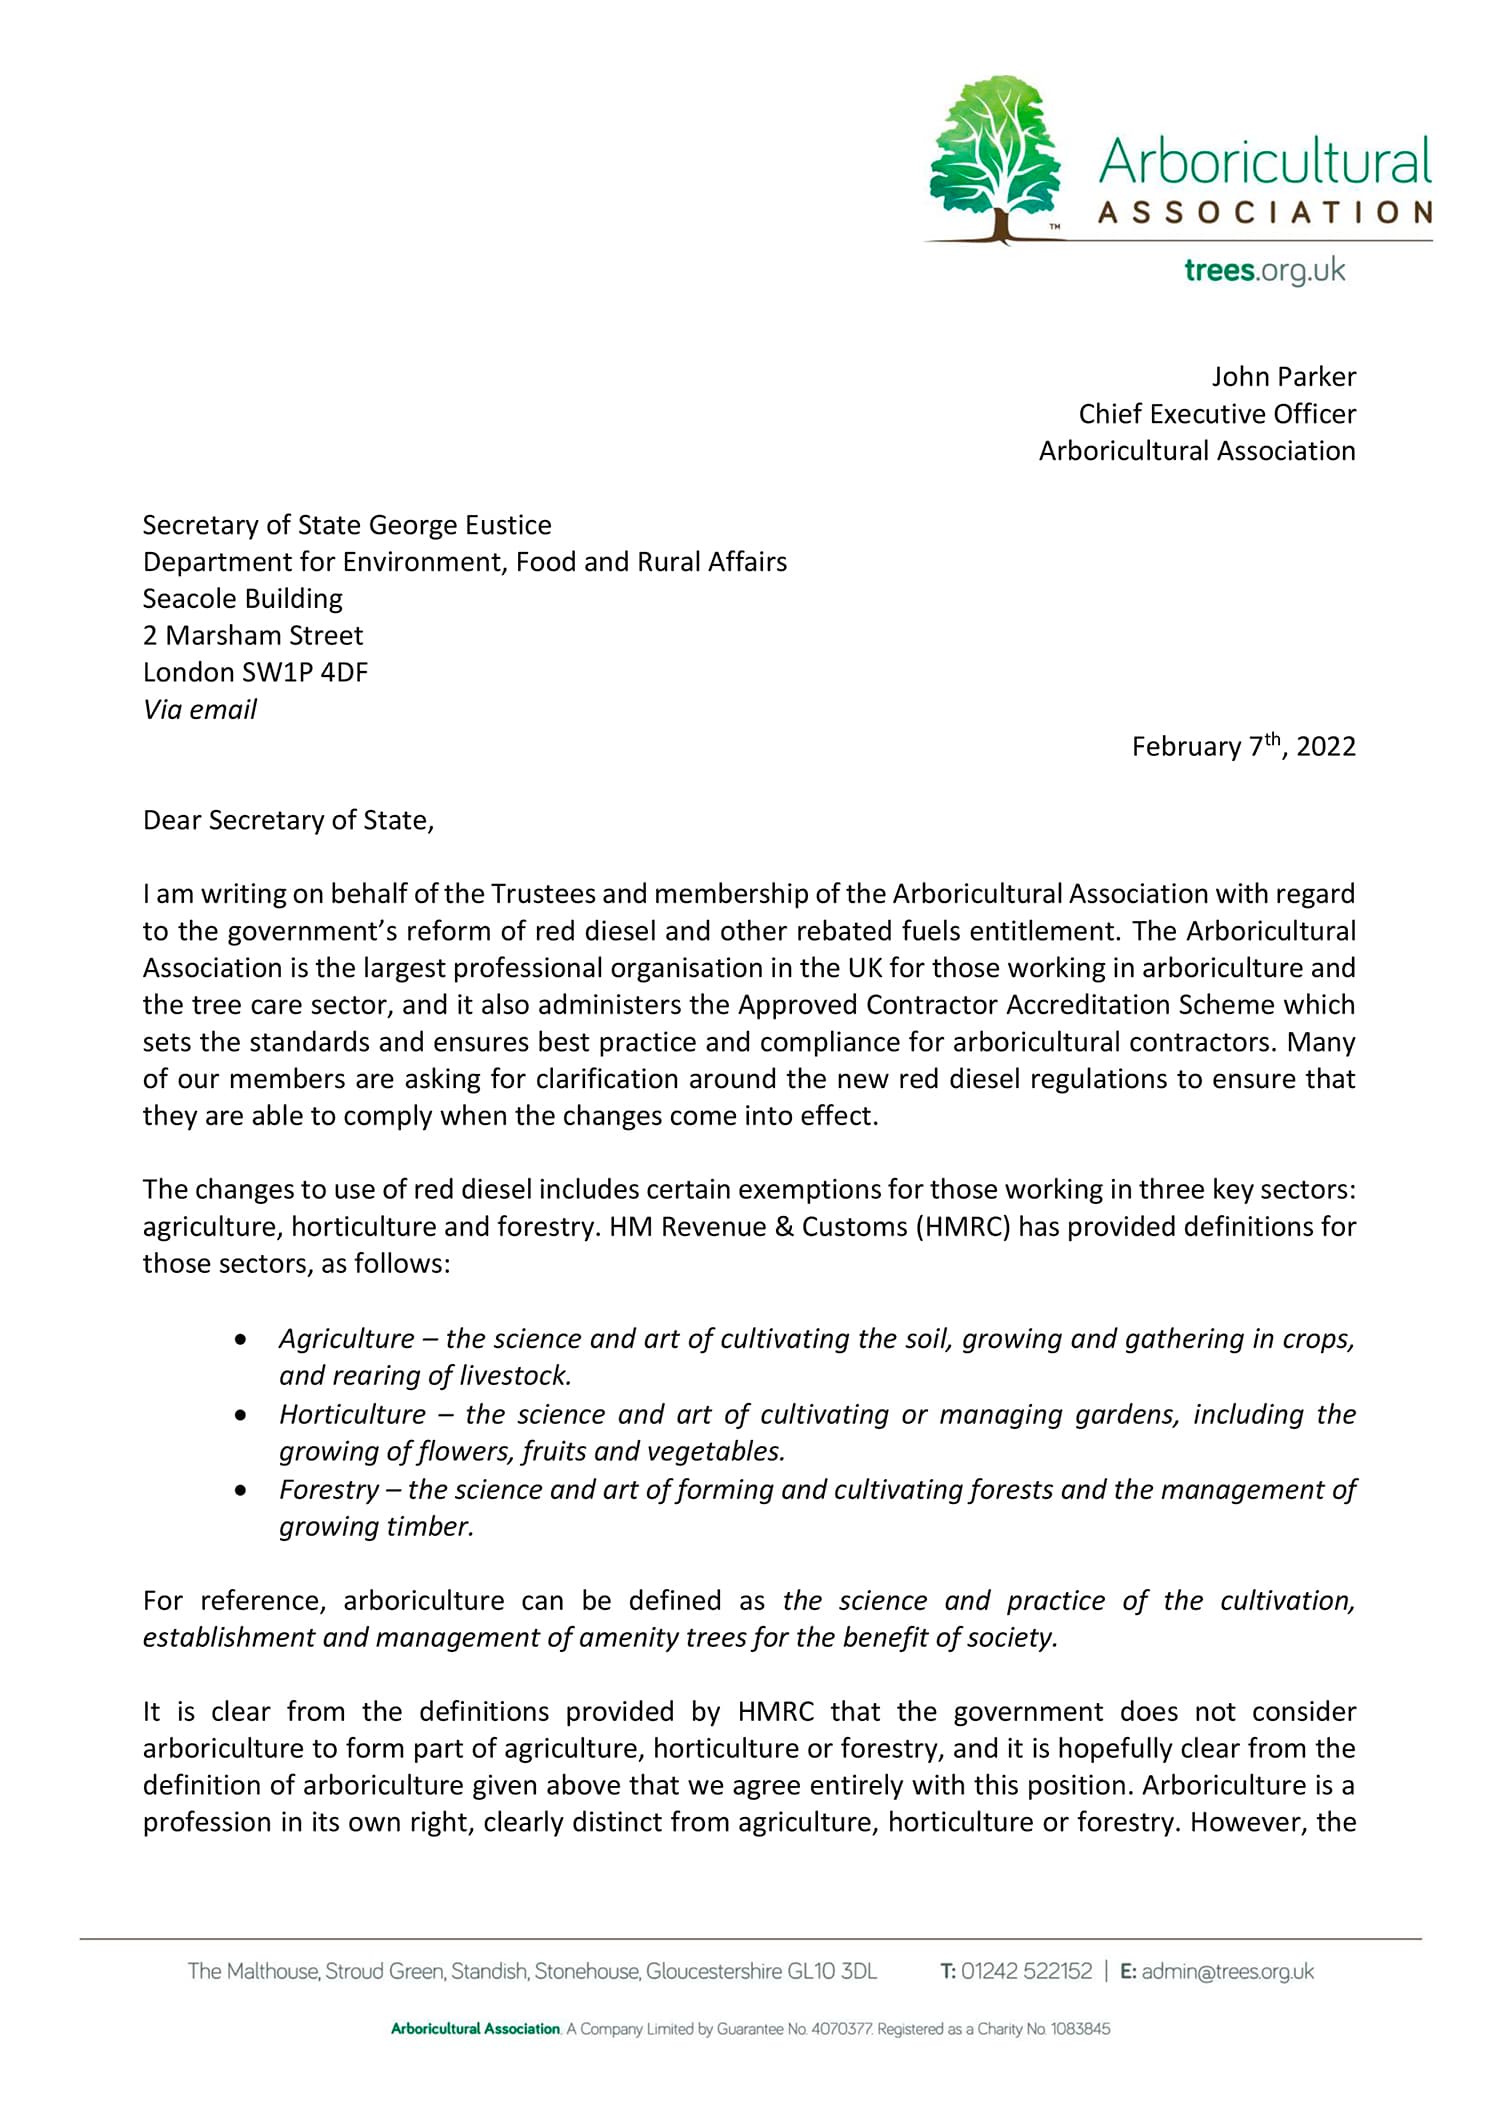 Letter sent to George Eustice